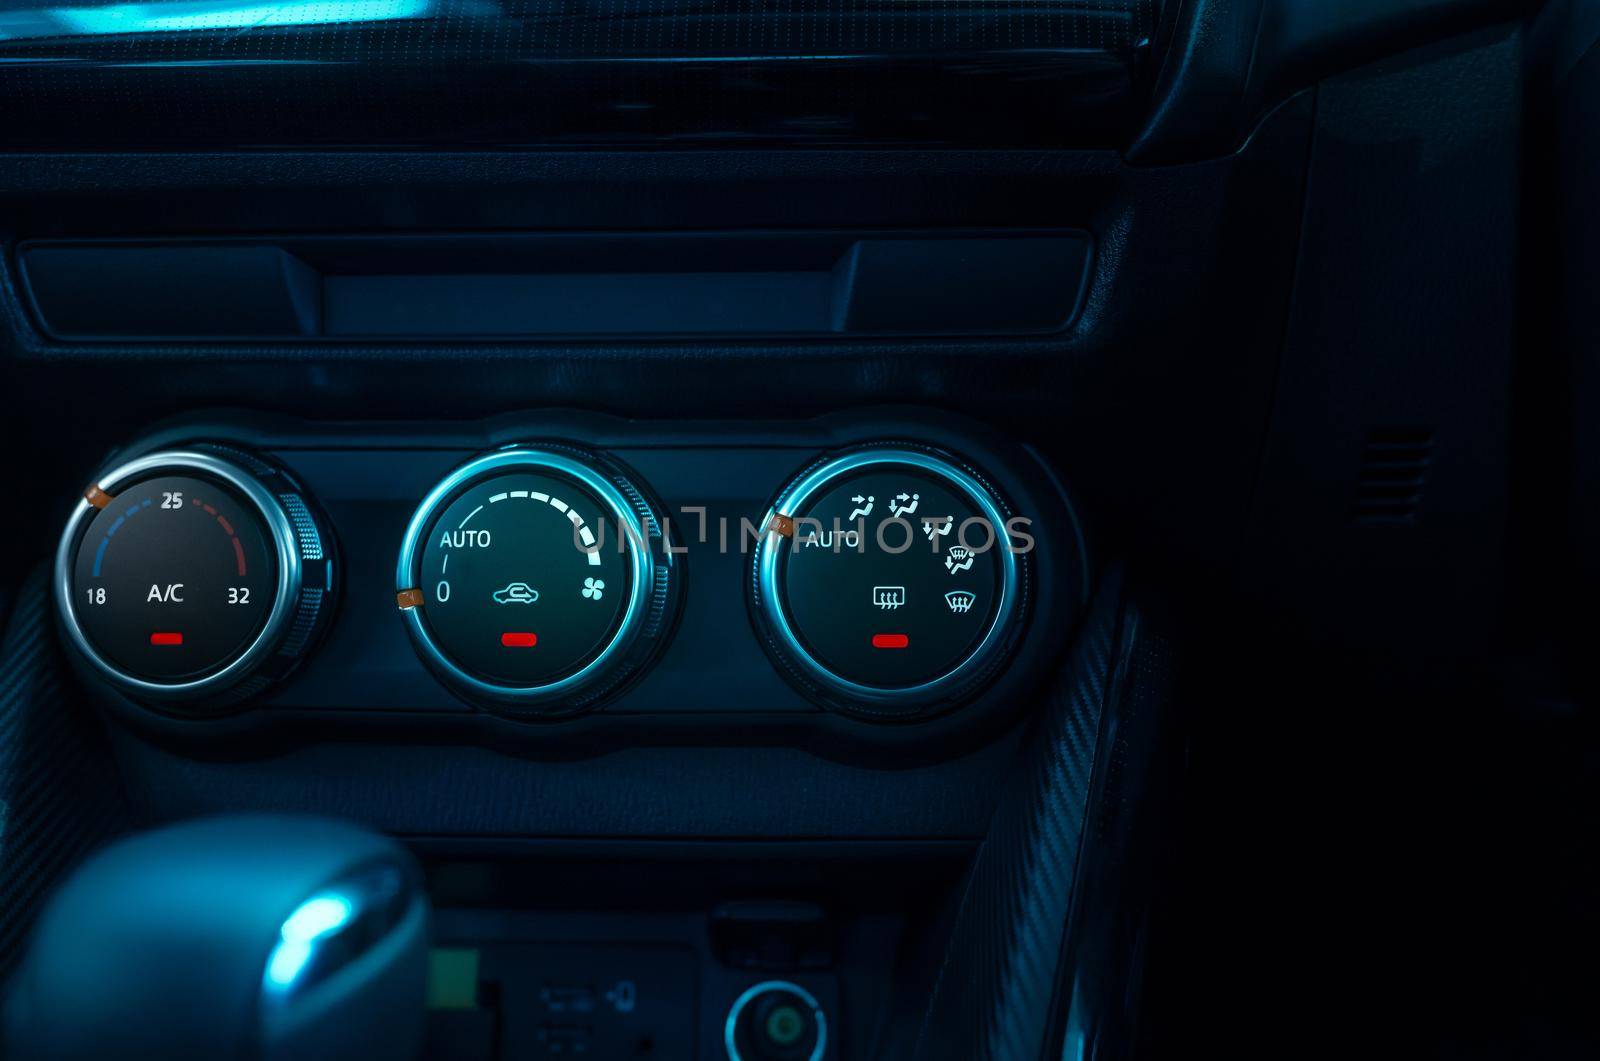 Climate control knob in modern car. Car air conditioner. Automobile air conditioning system. Car ventilation system. Ventilation system in vehicle. Round climate control adjusting knob. Car interior.